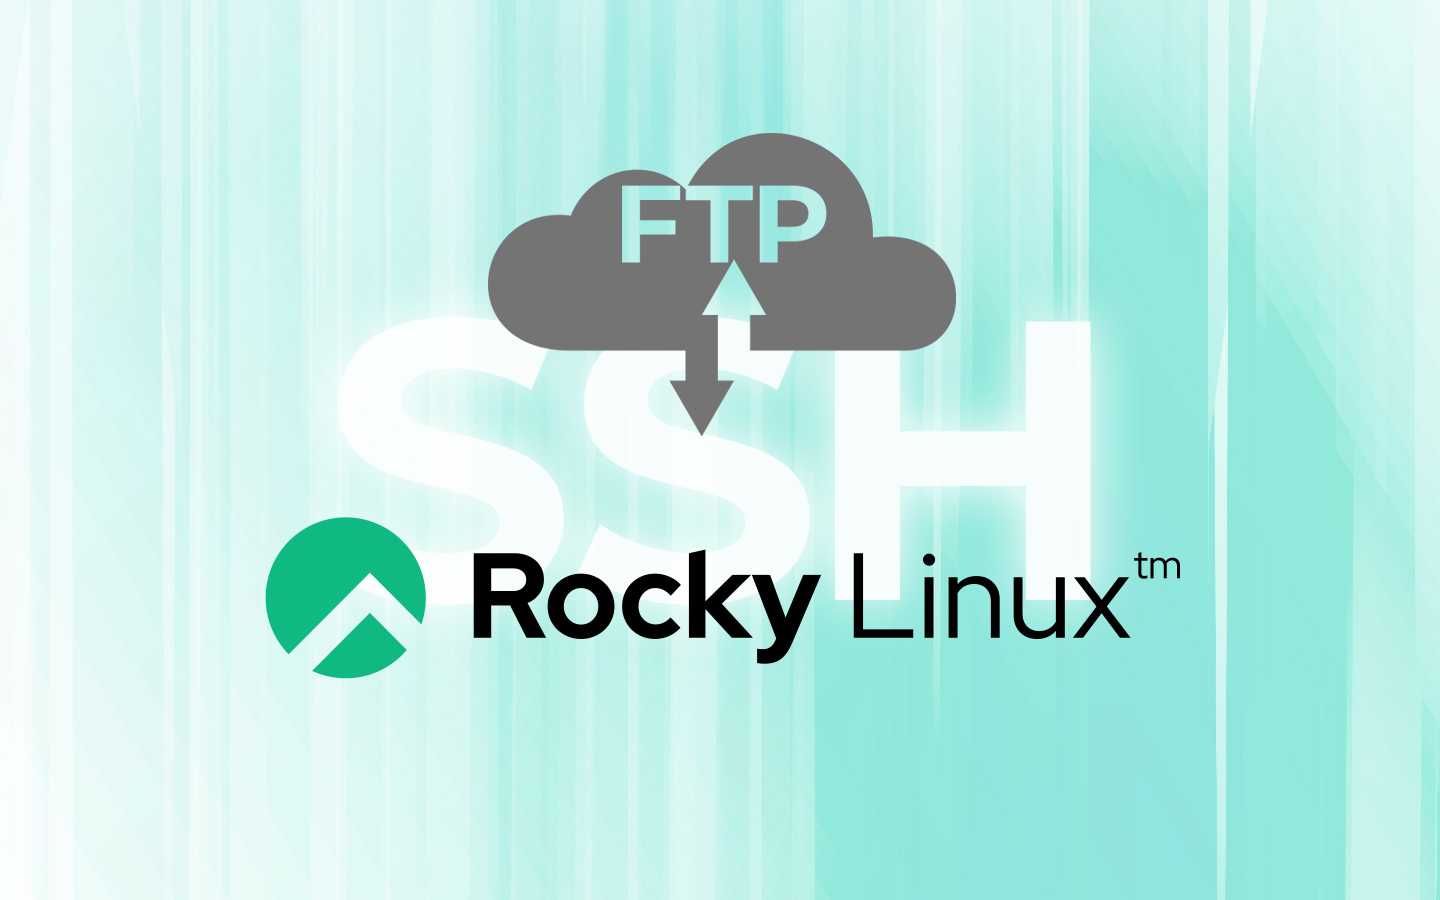 How to Configure an FTP Server on Rocky Linux with the Help of SSH